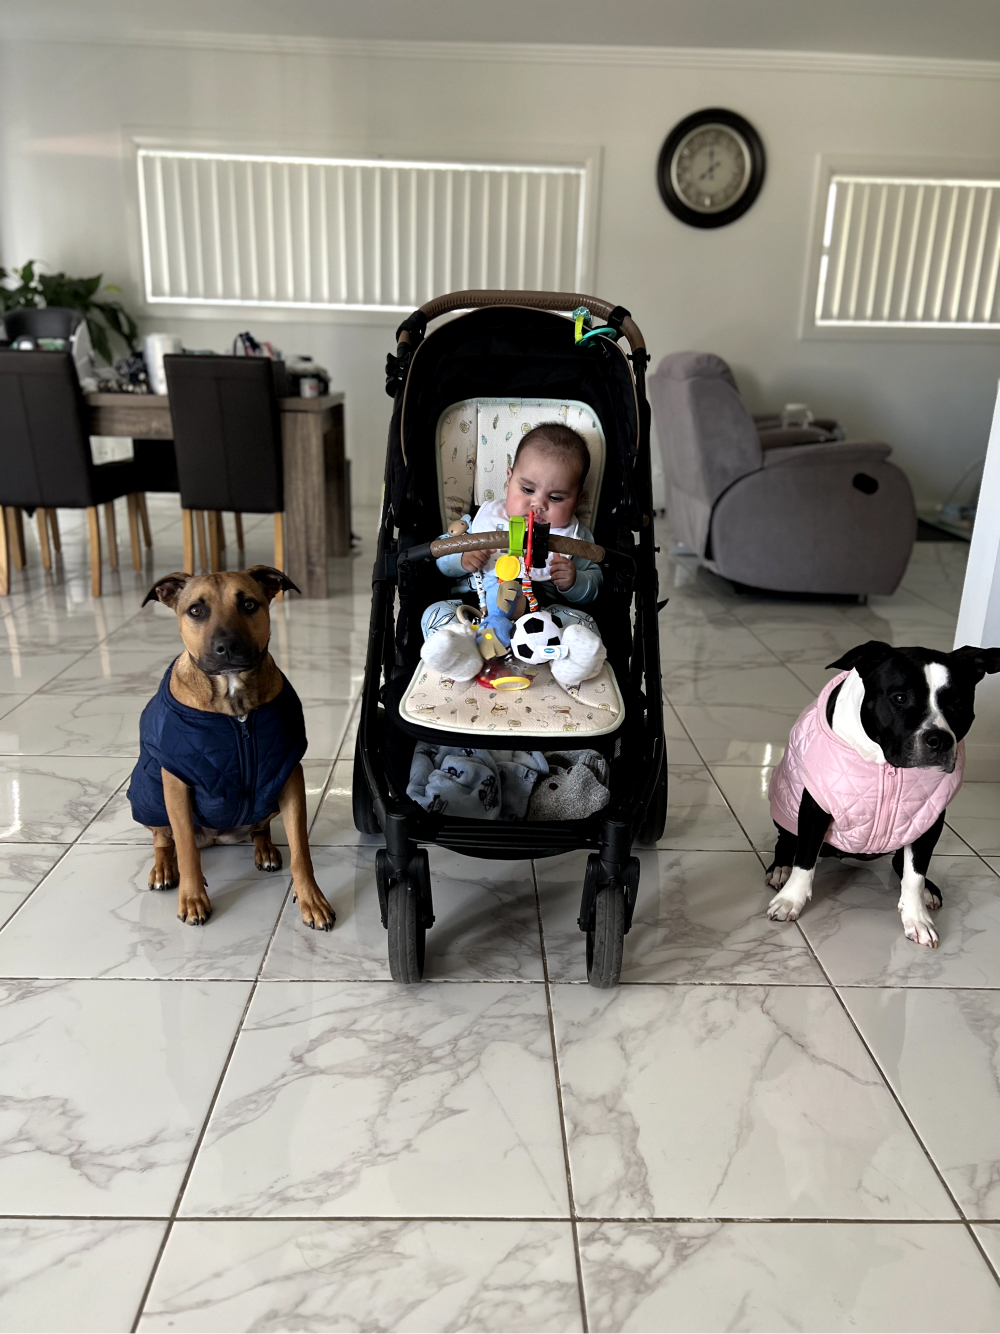 Elijah in his pram with the dogs next to him